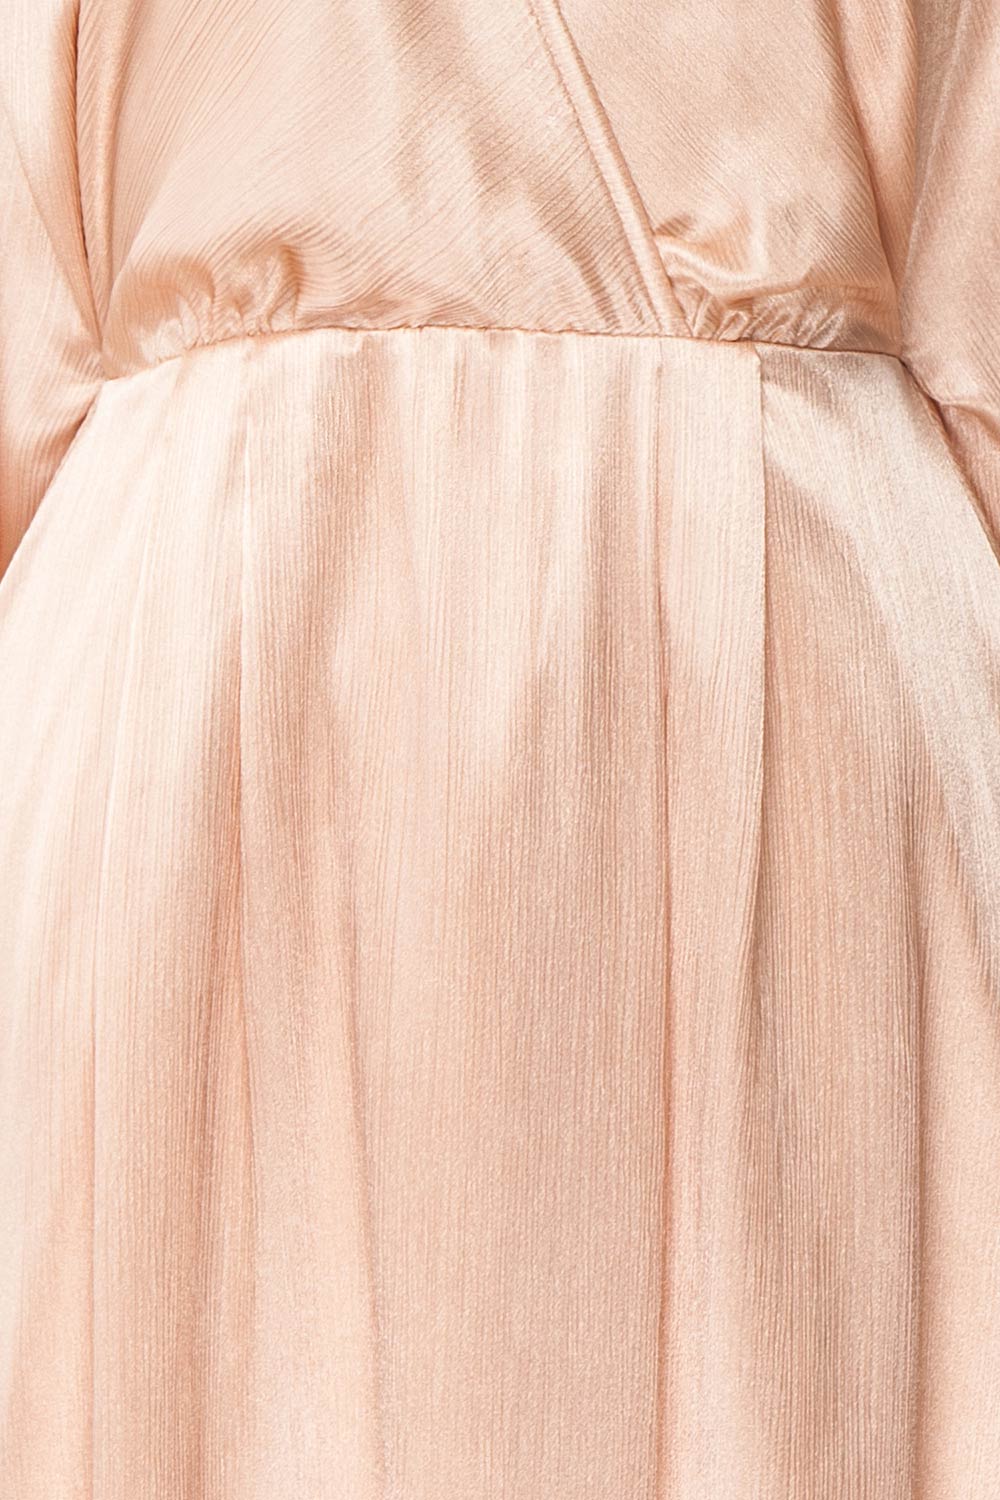 Loralyn Pink Satin Party Dress | Robe fabric close up | Boutique 1861